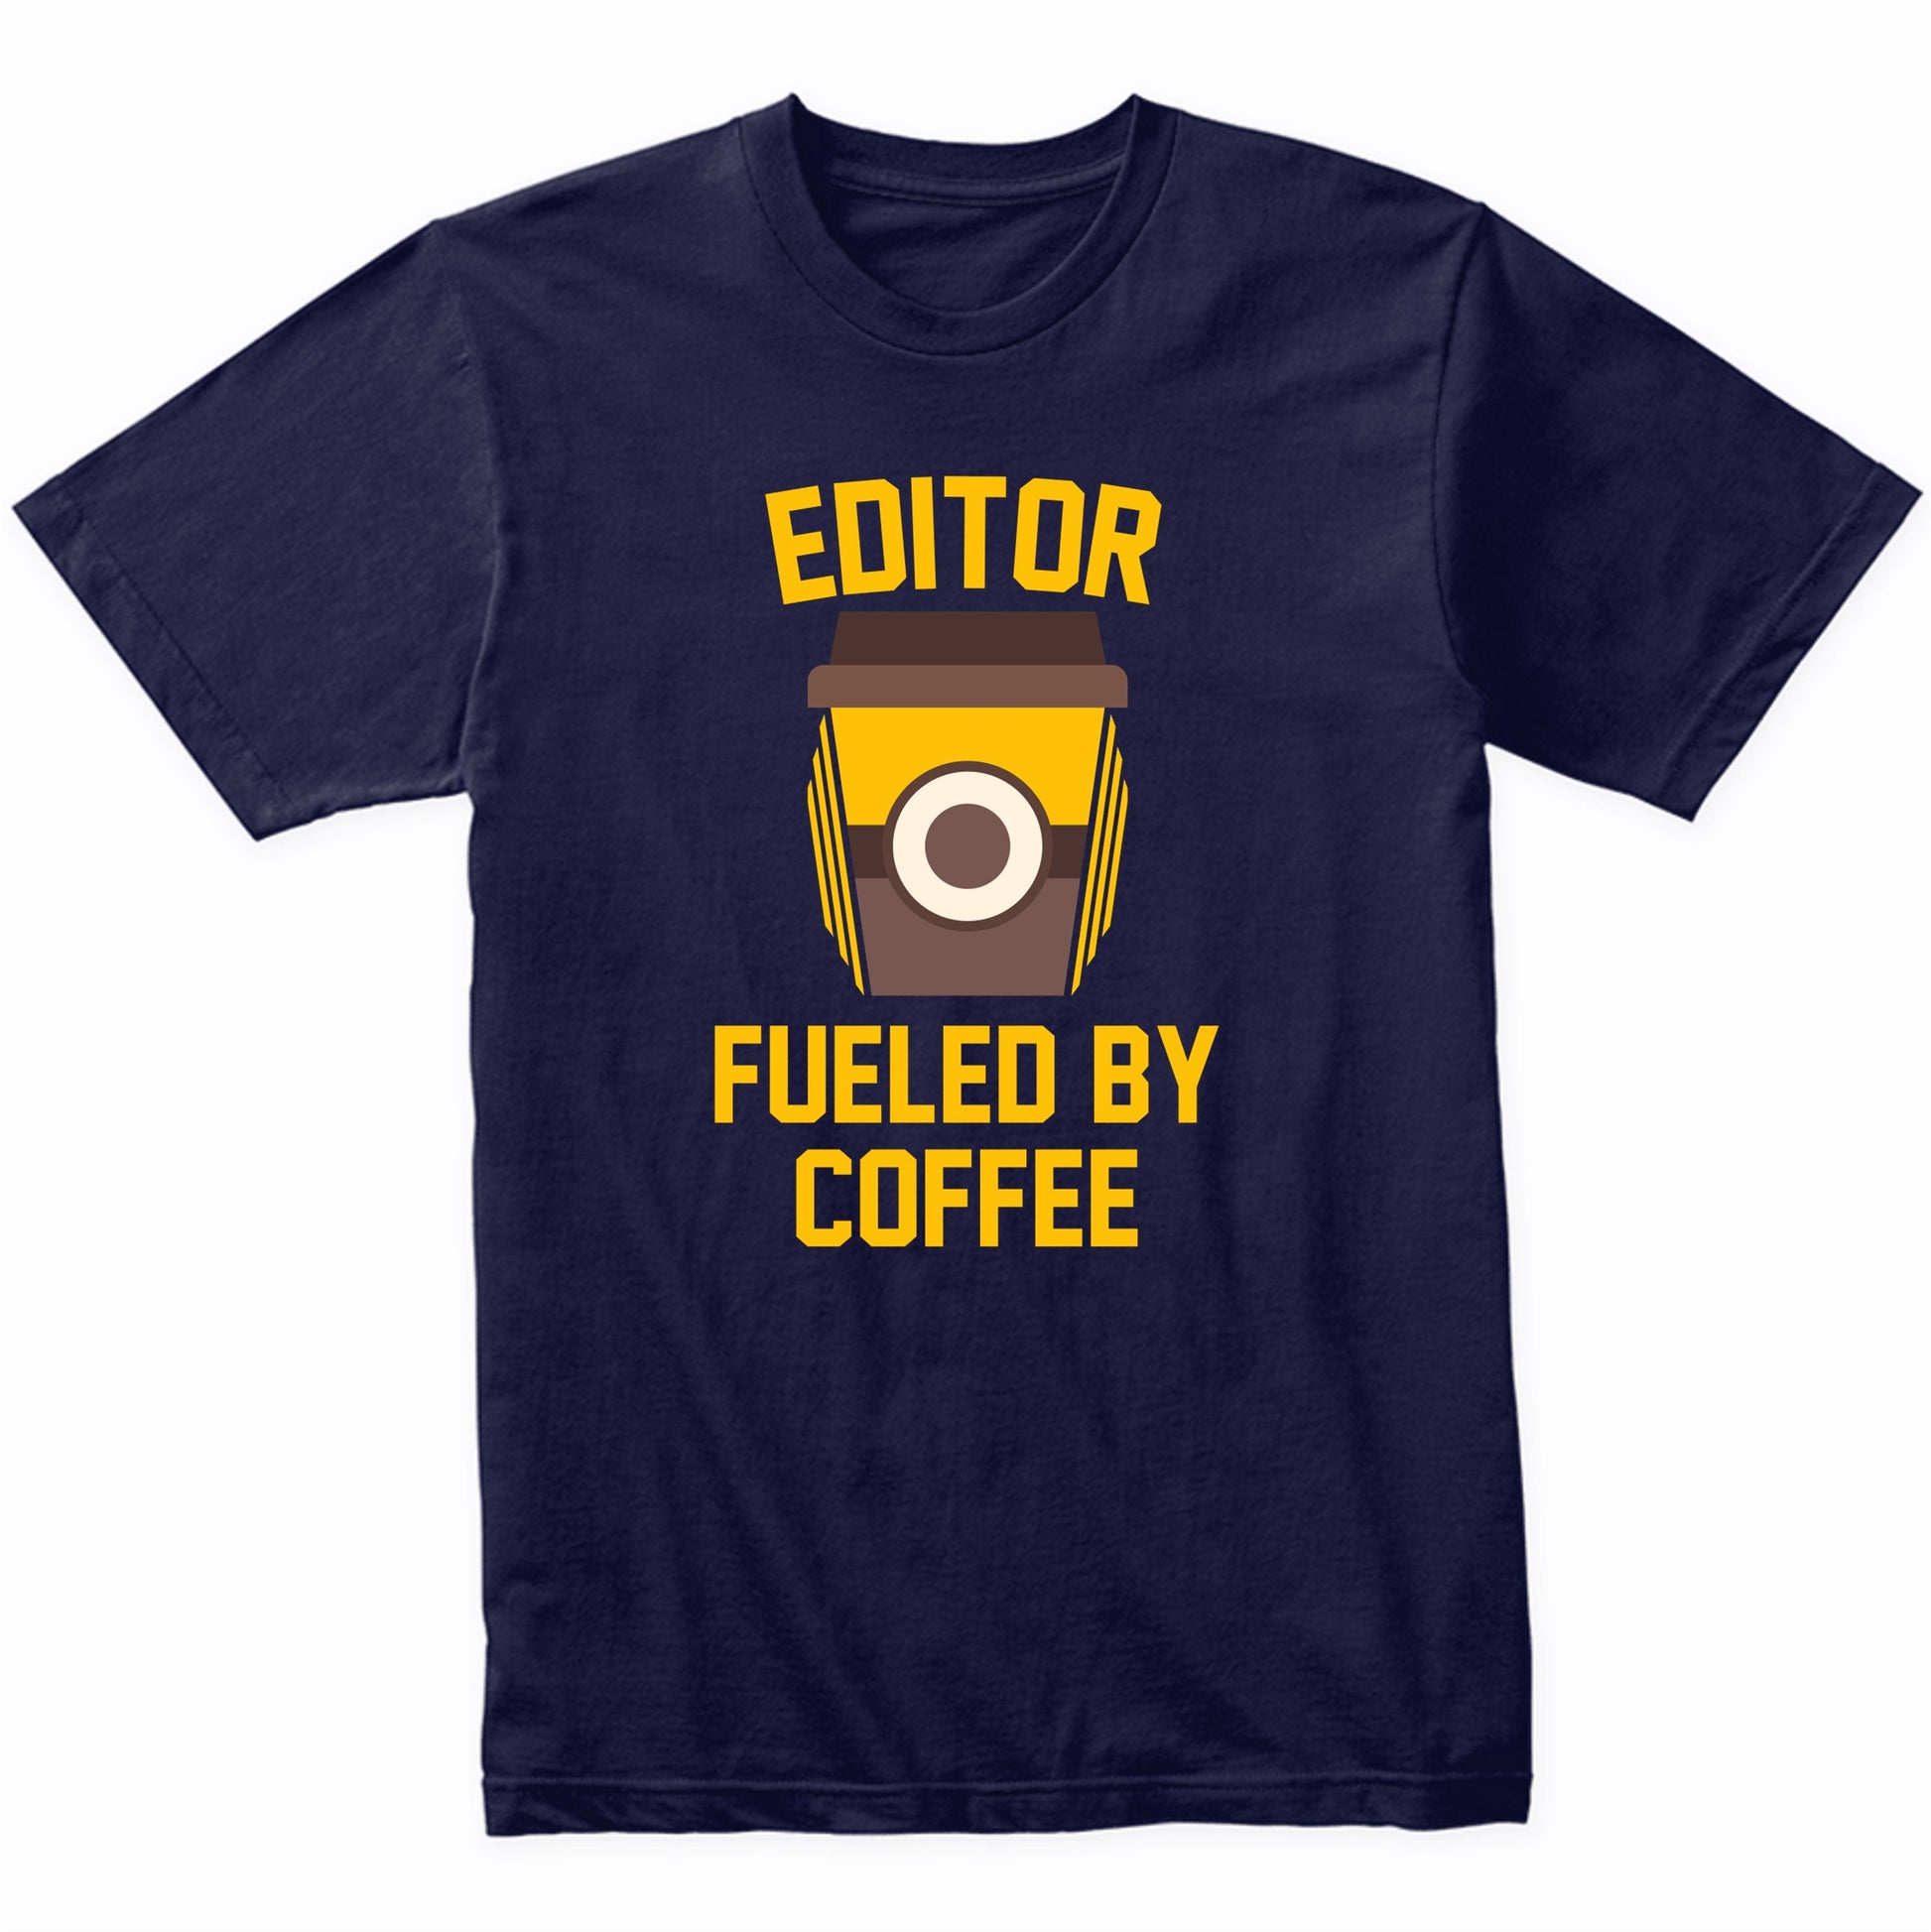 Editor Fueled By Coffee Funny Shirt